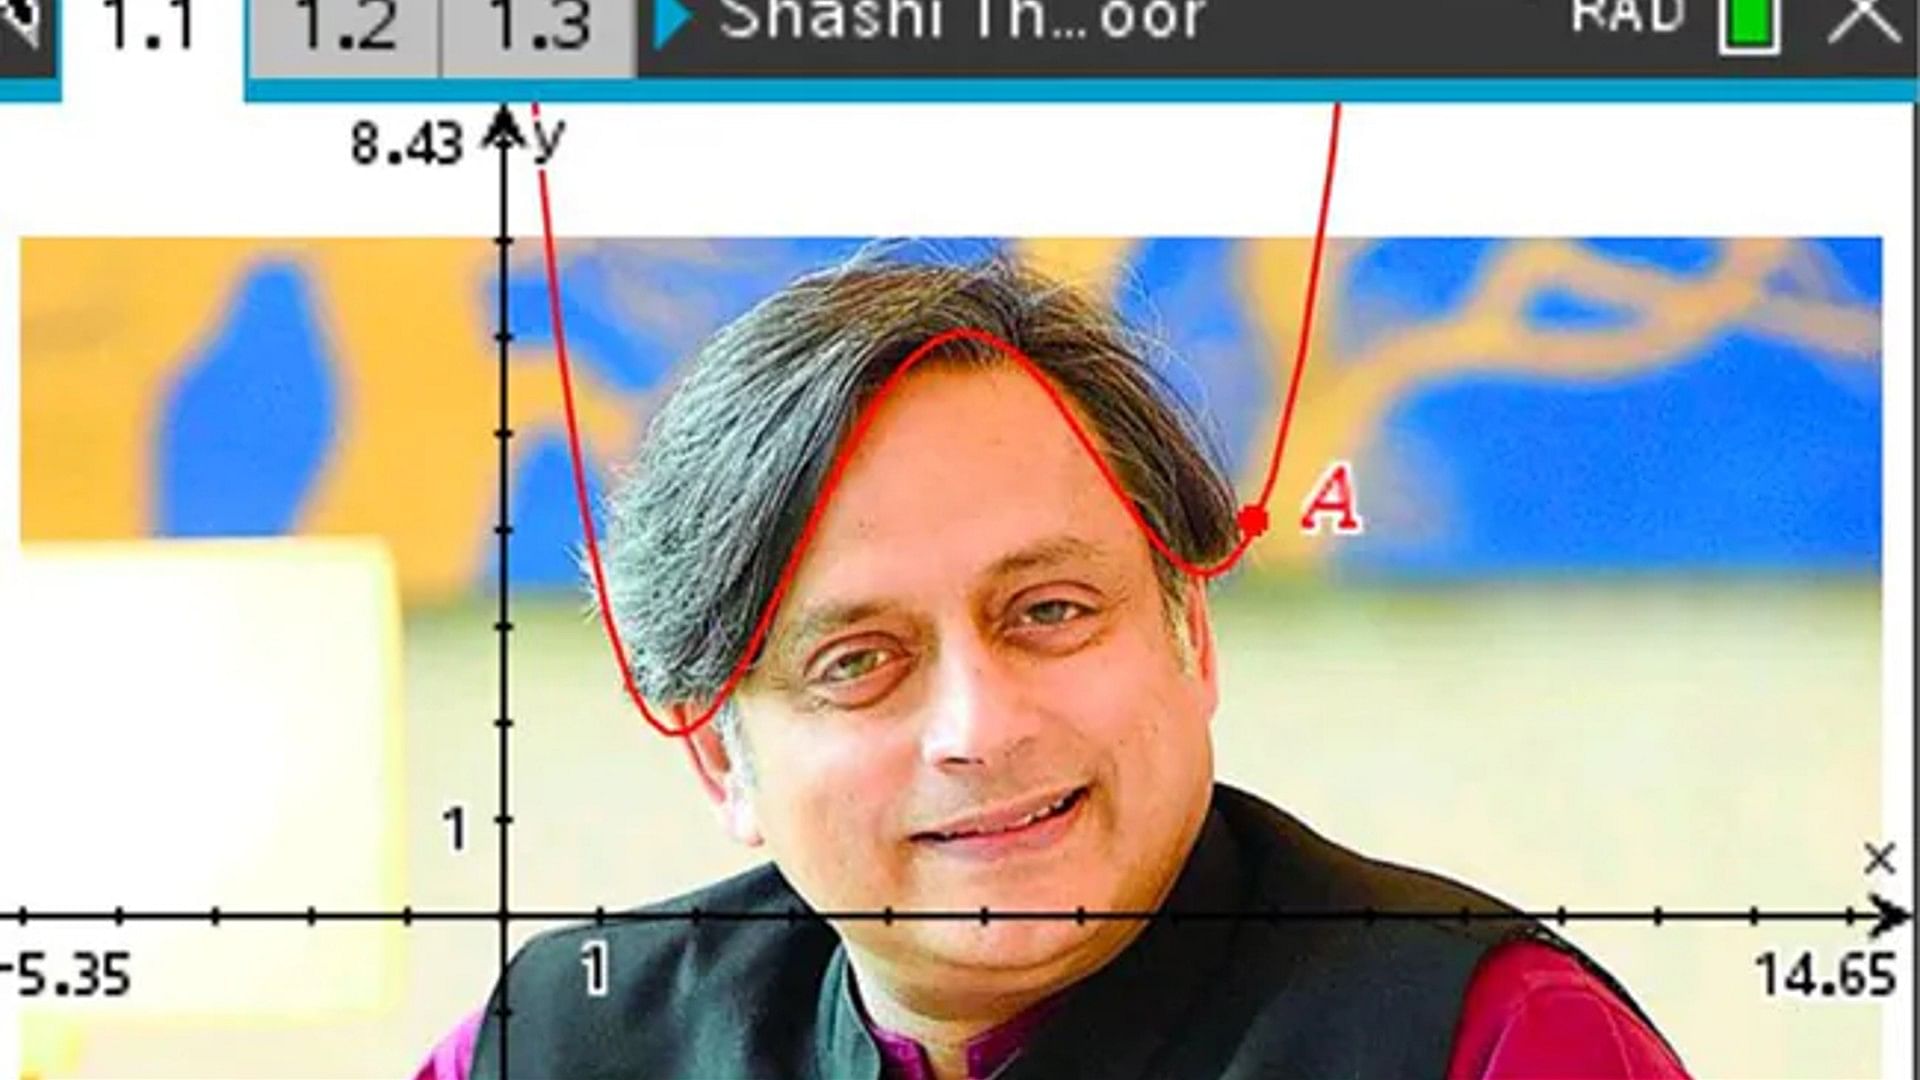 bangladesh teacher finds shashi tharoor's hairline as good quartic fit shashi tharoor reacted